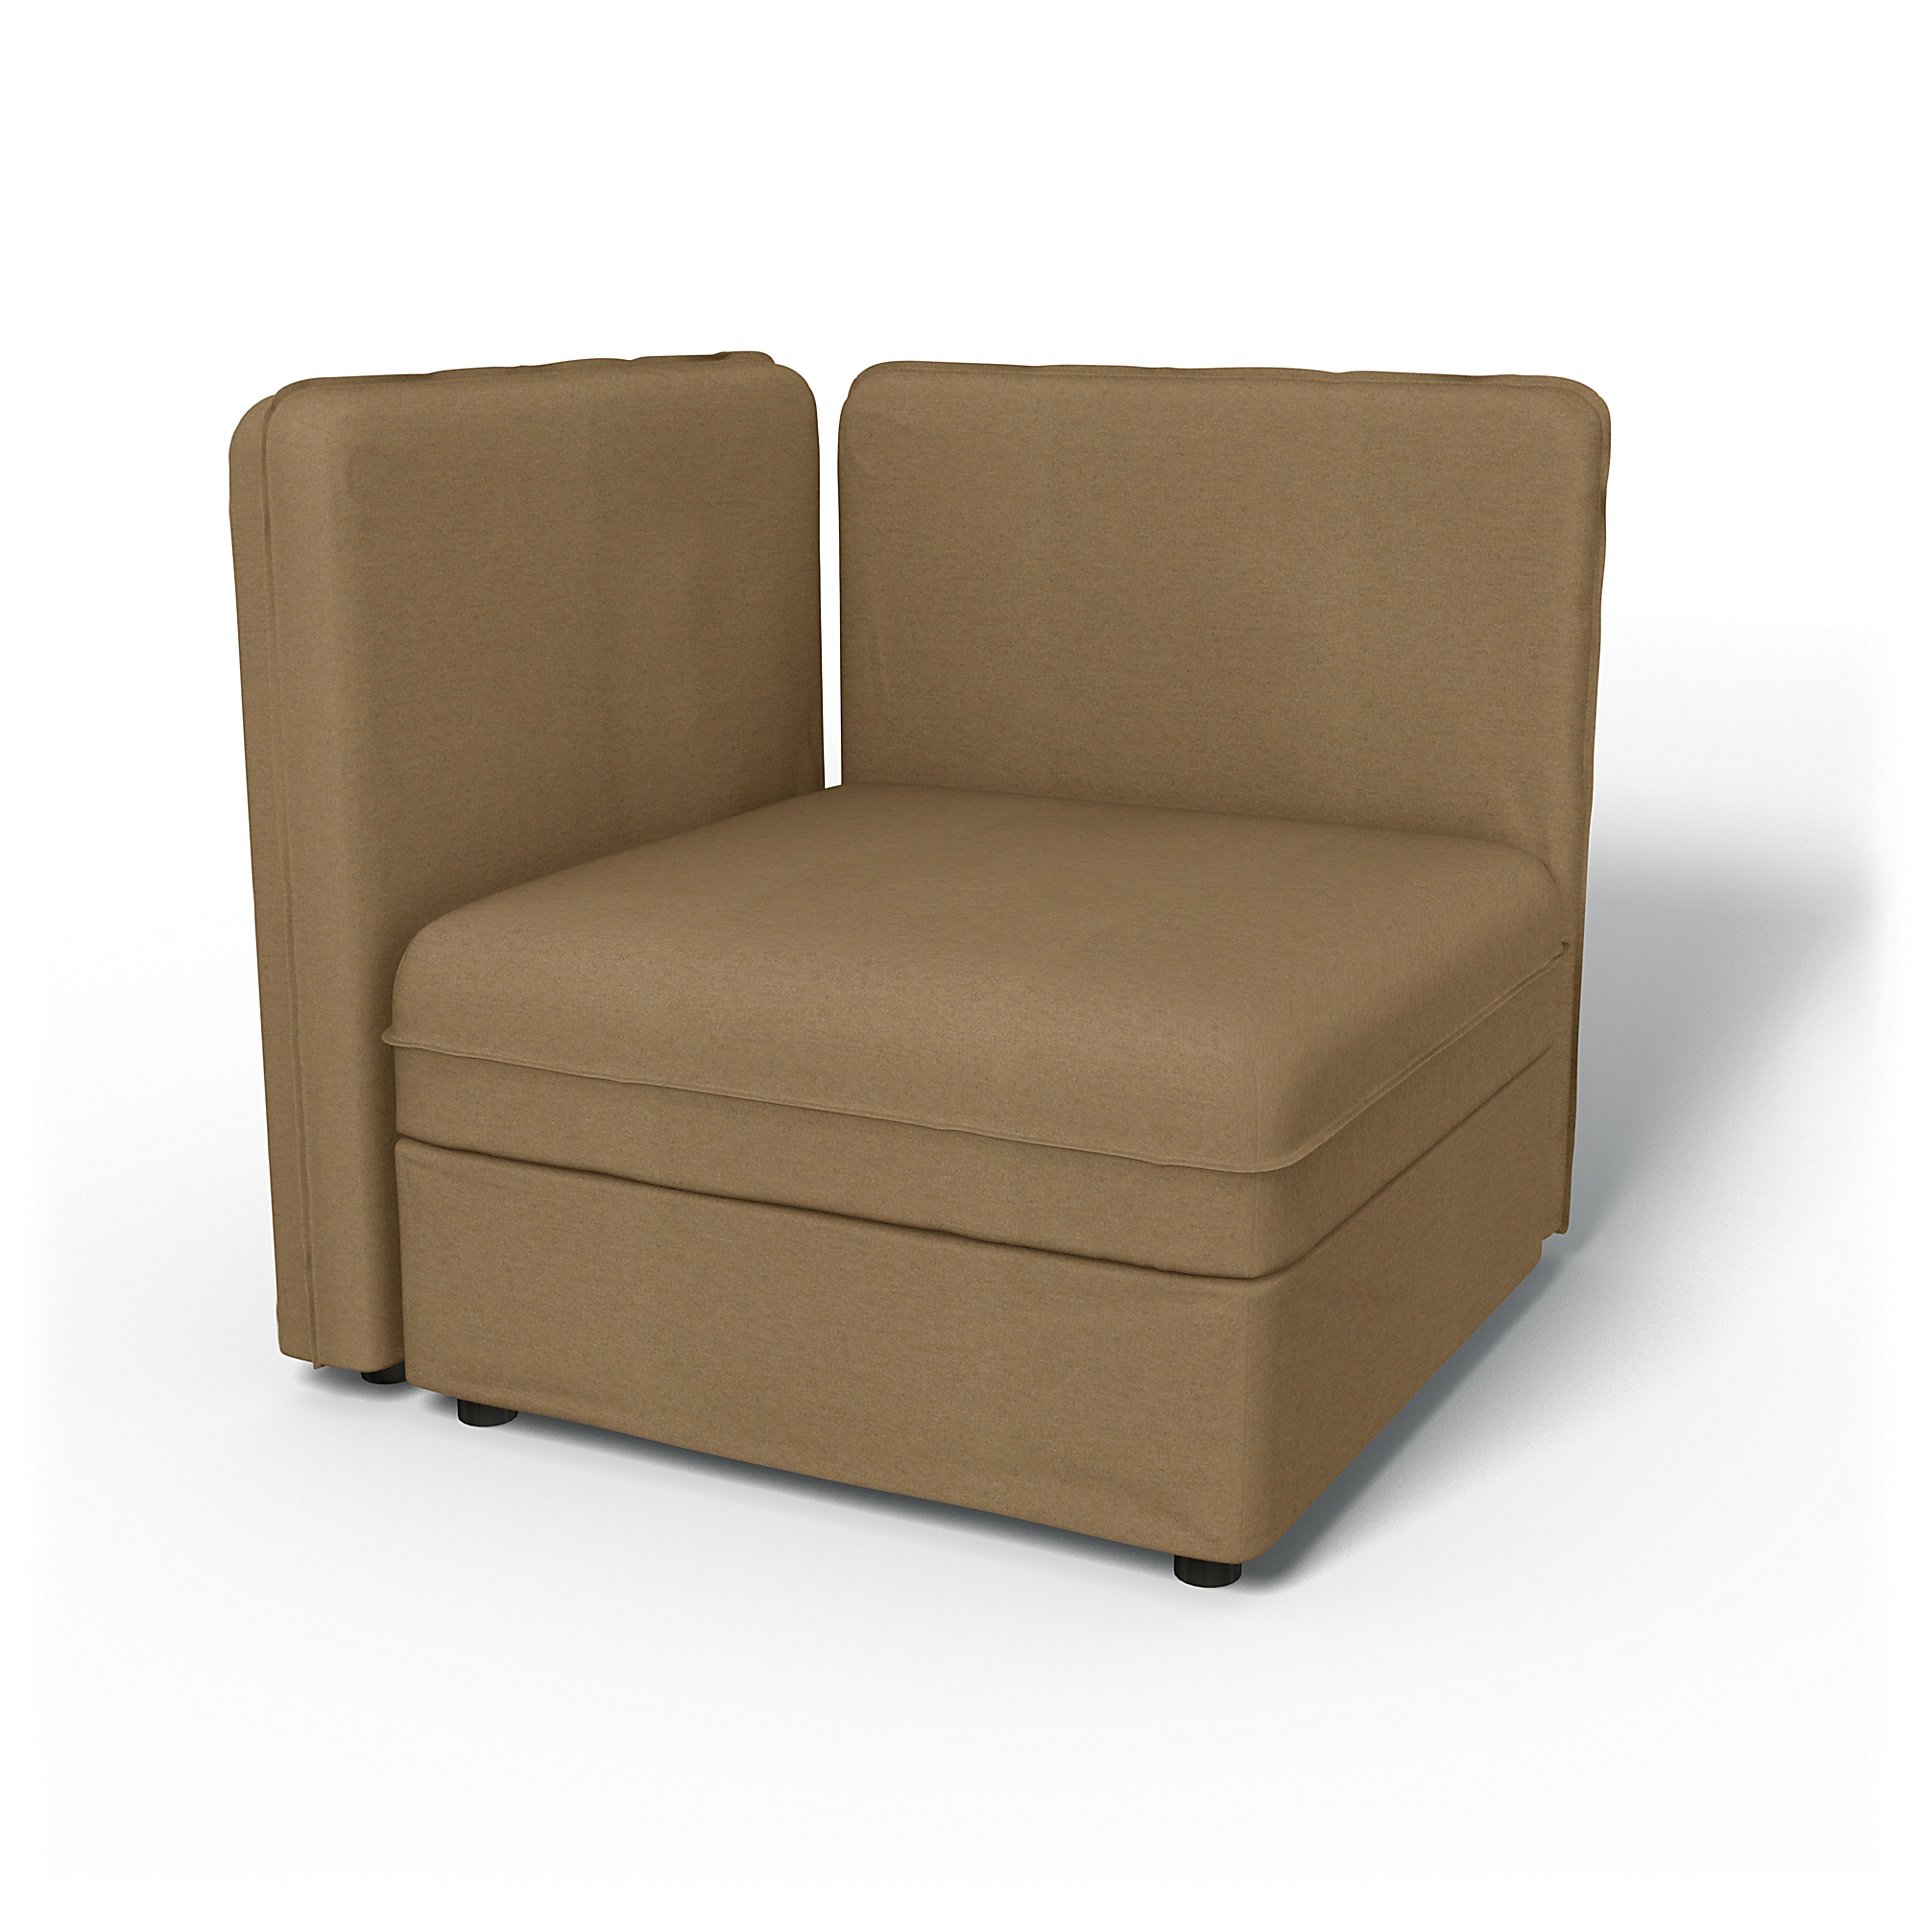 IKEA - Vallentuna Seat Module with Low Back and Storage Cover 80x80cm 32x32in, Sand, Wool - Bemz